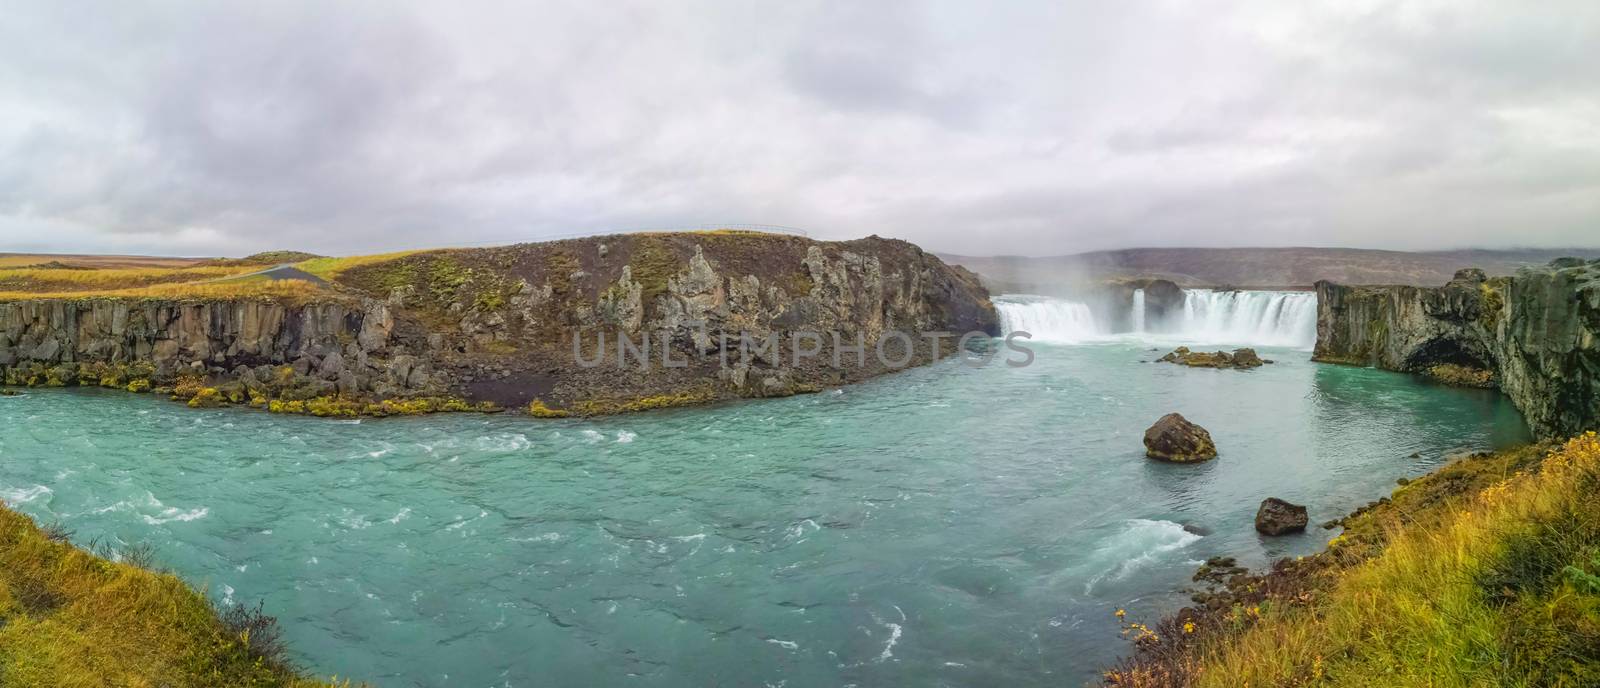 Godafoss waterfall in Iceland panorama of plunge pool turquoise water by MXW_Stock